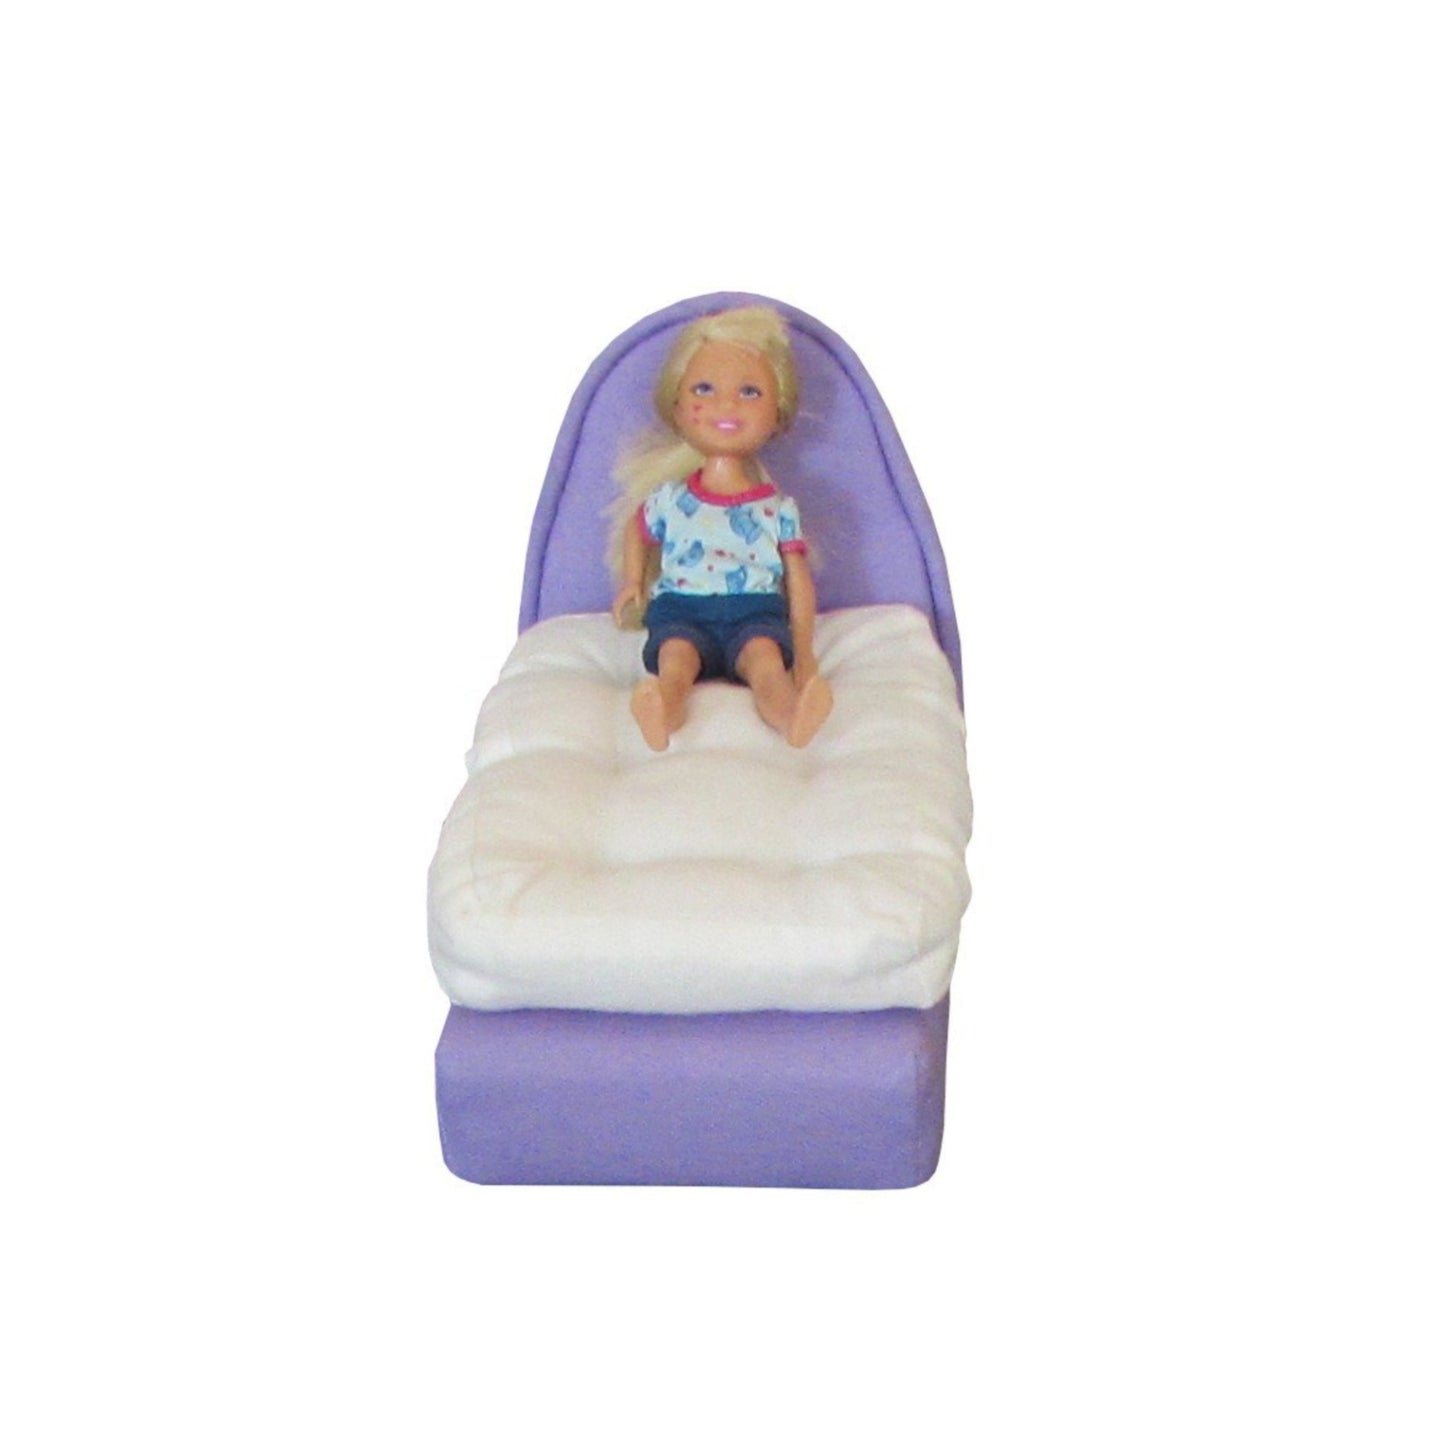 Upholstered Lavender Doll Bed and Mattress for 6.5-inch dolls with doll